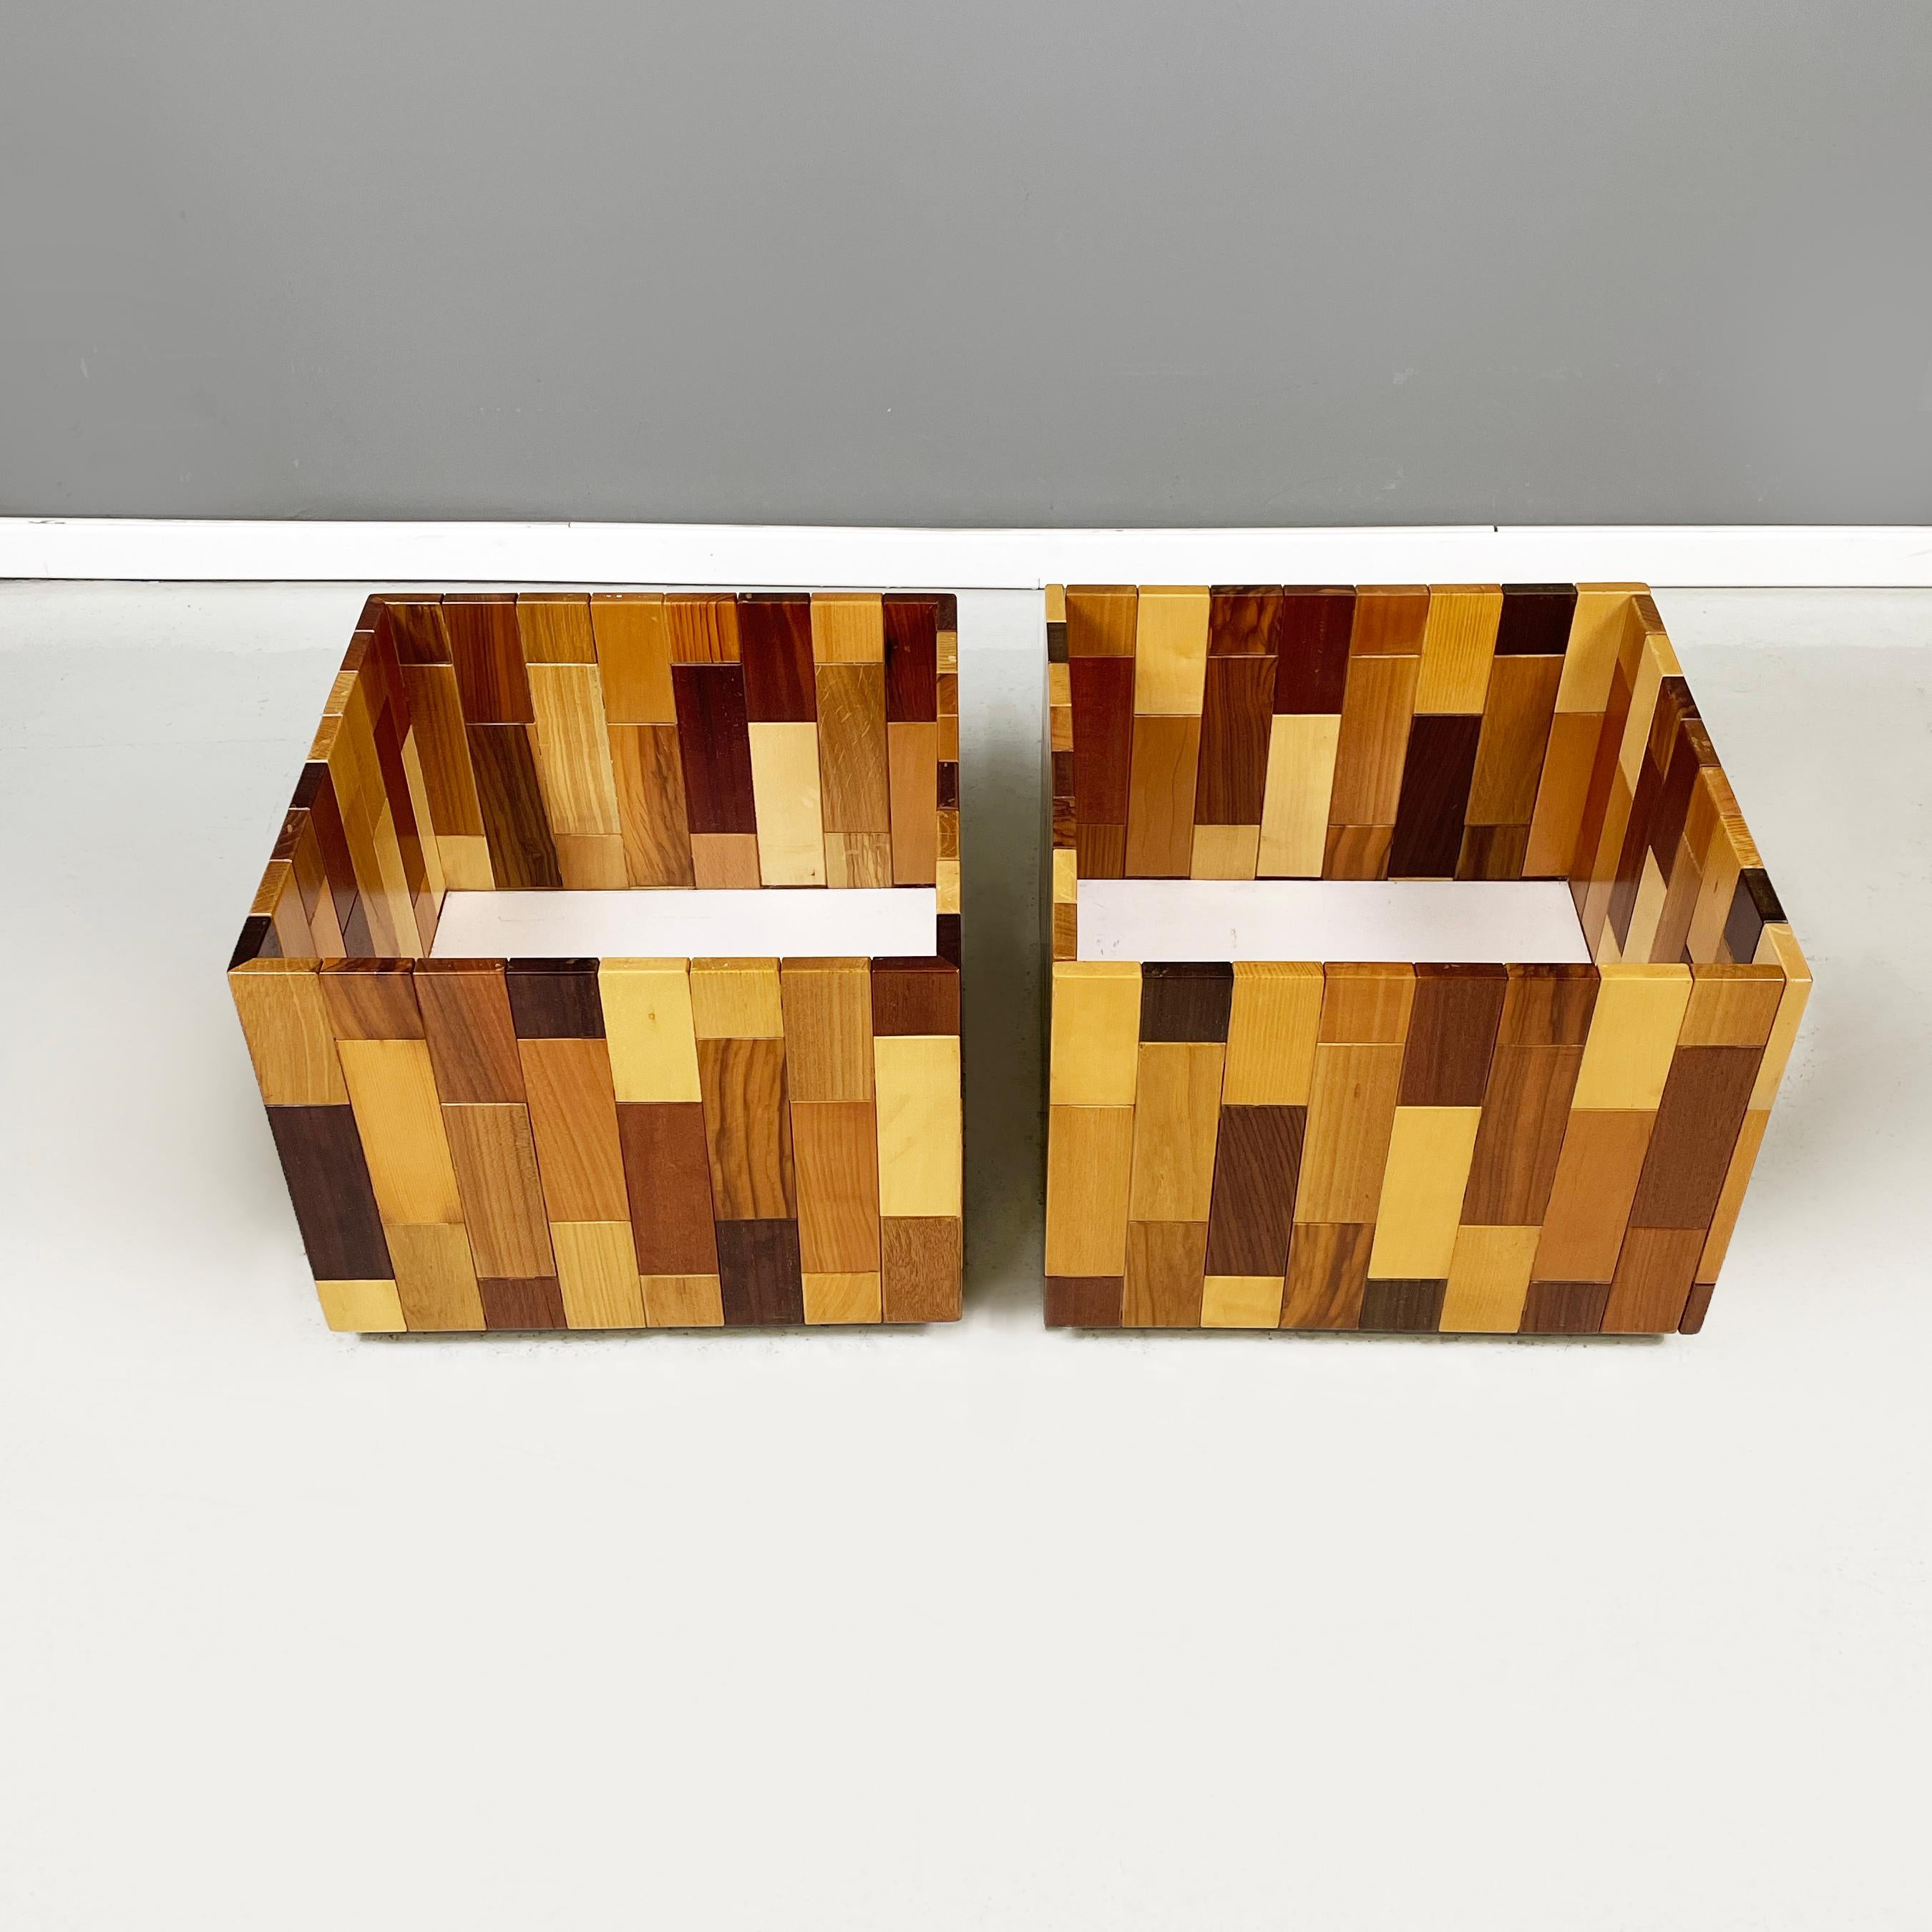 Italian modern planters with wheels in wooden strips in different colors, 2000s
Pair of square-based planters with wooden strip structure of different colors. The base is white. Below it has 4 black wheels.
These vases came from 2000 approx.
Good